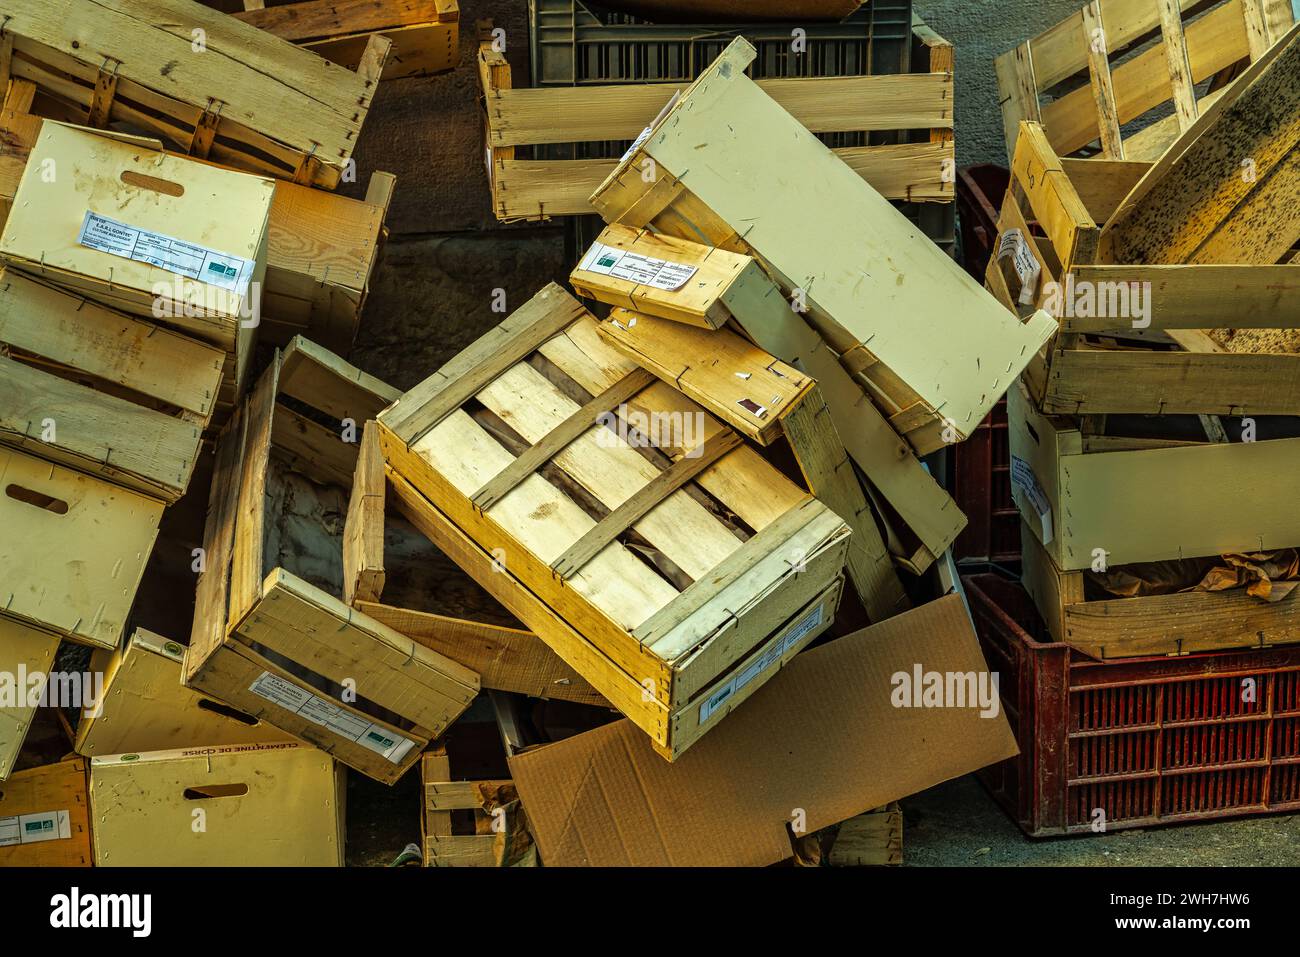 Wooden boxes used and then abandoned and piled up in a street corner. Italy Stock Photo